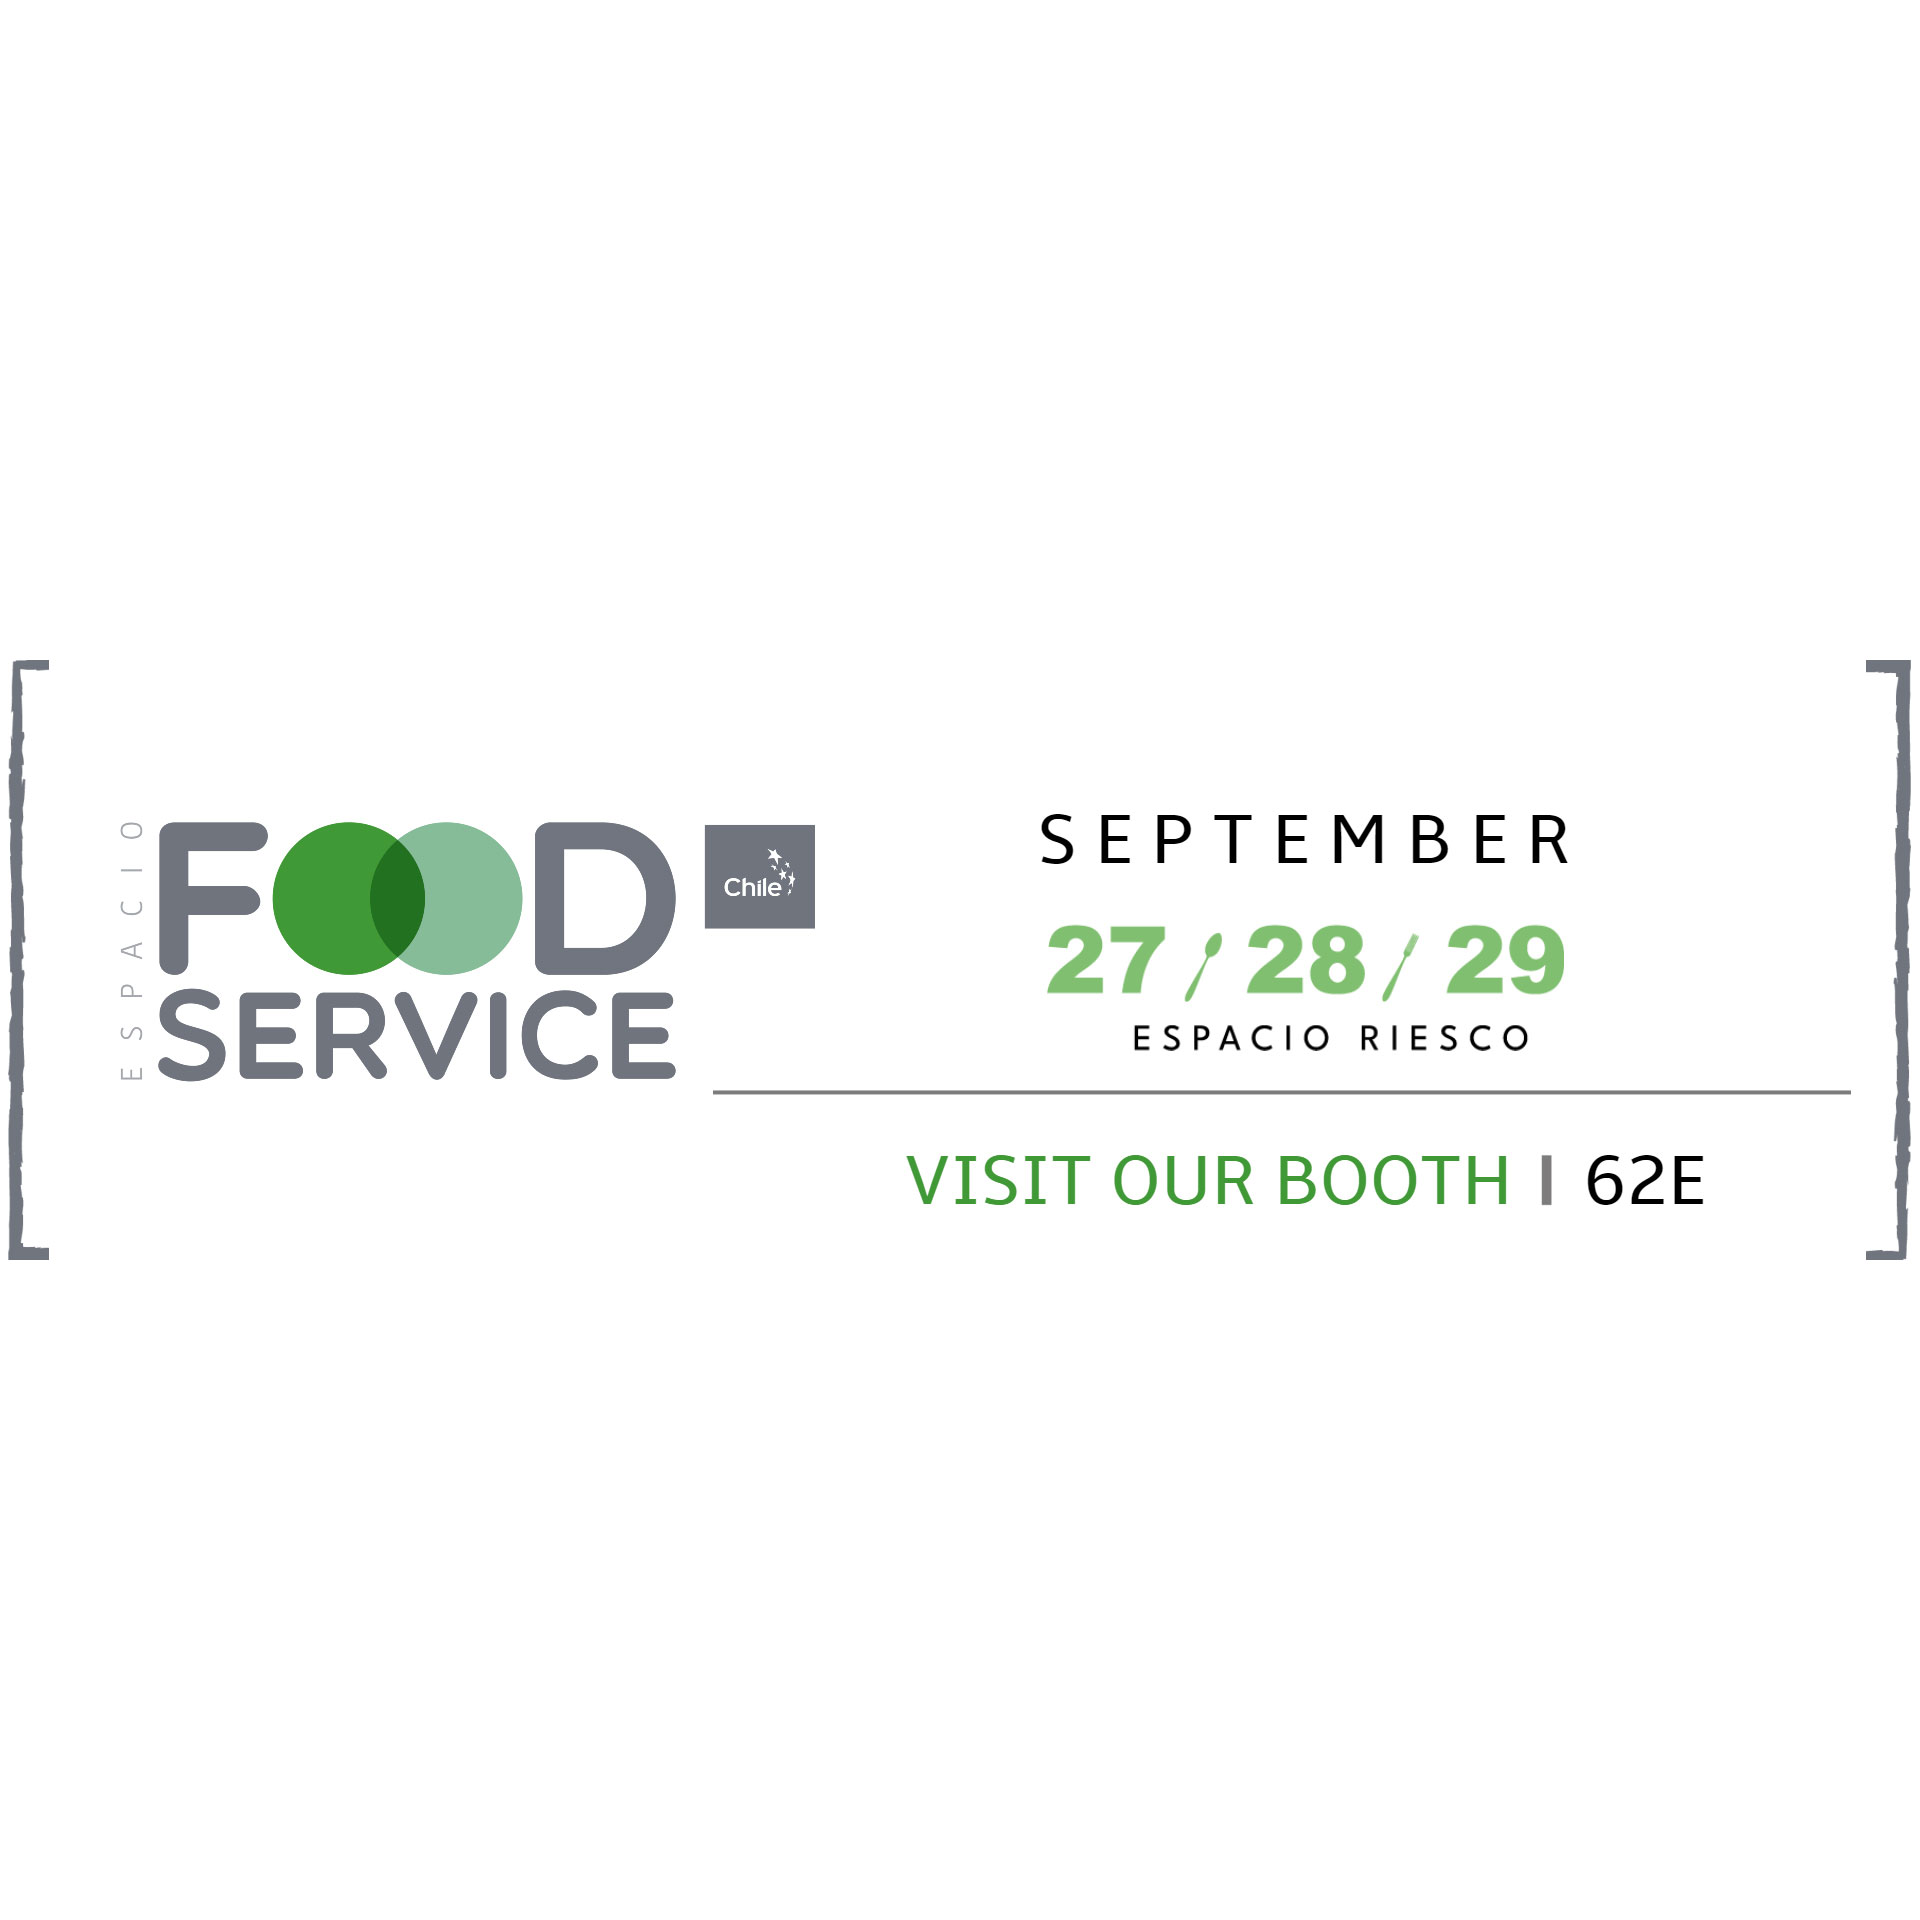 Alexandrion Group will be present at the 10th edition of the Food & Service Fair from Chile